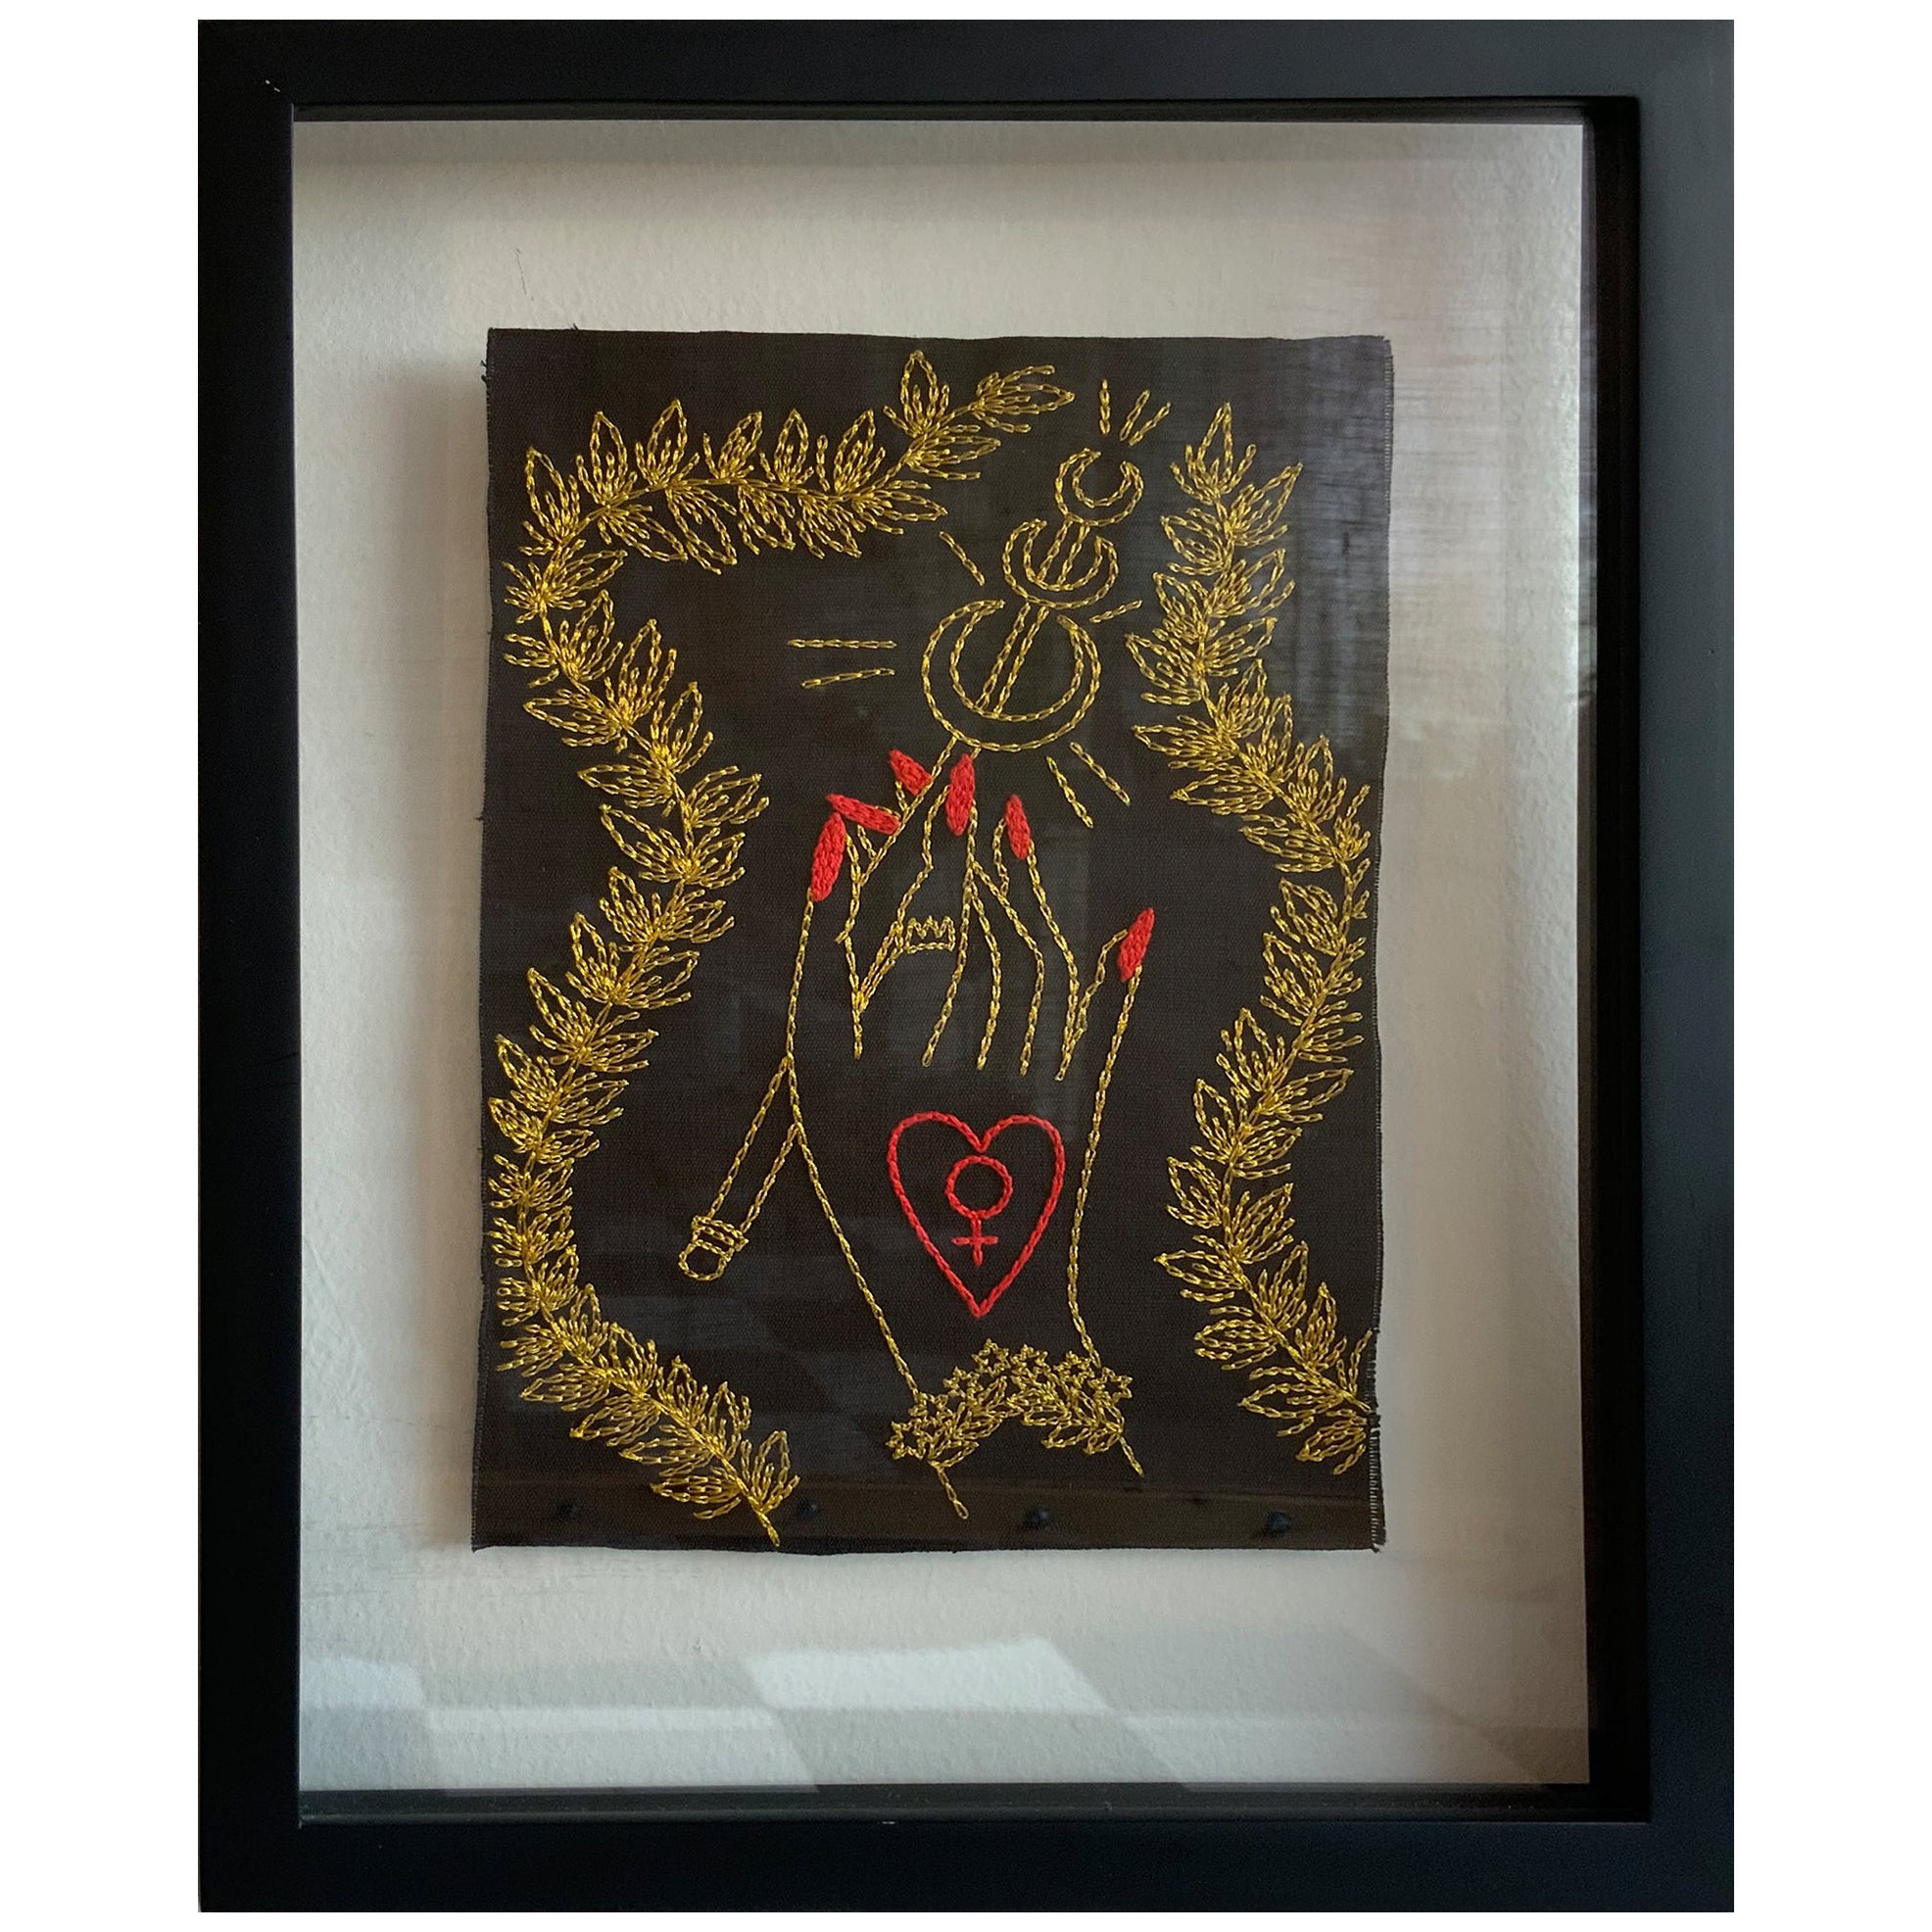 La Emperatriz. From The Ventura Series.  Embroidery thread on canvas. Framed